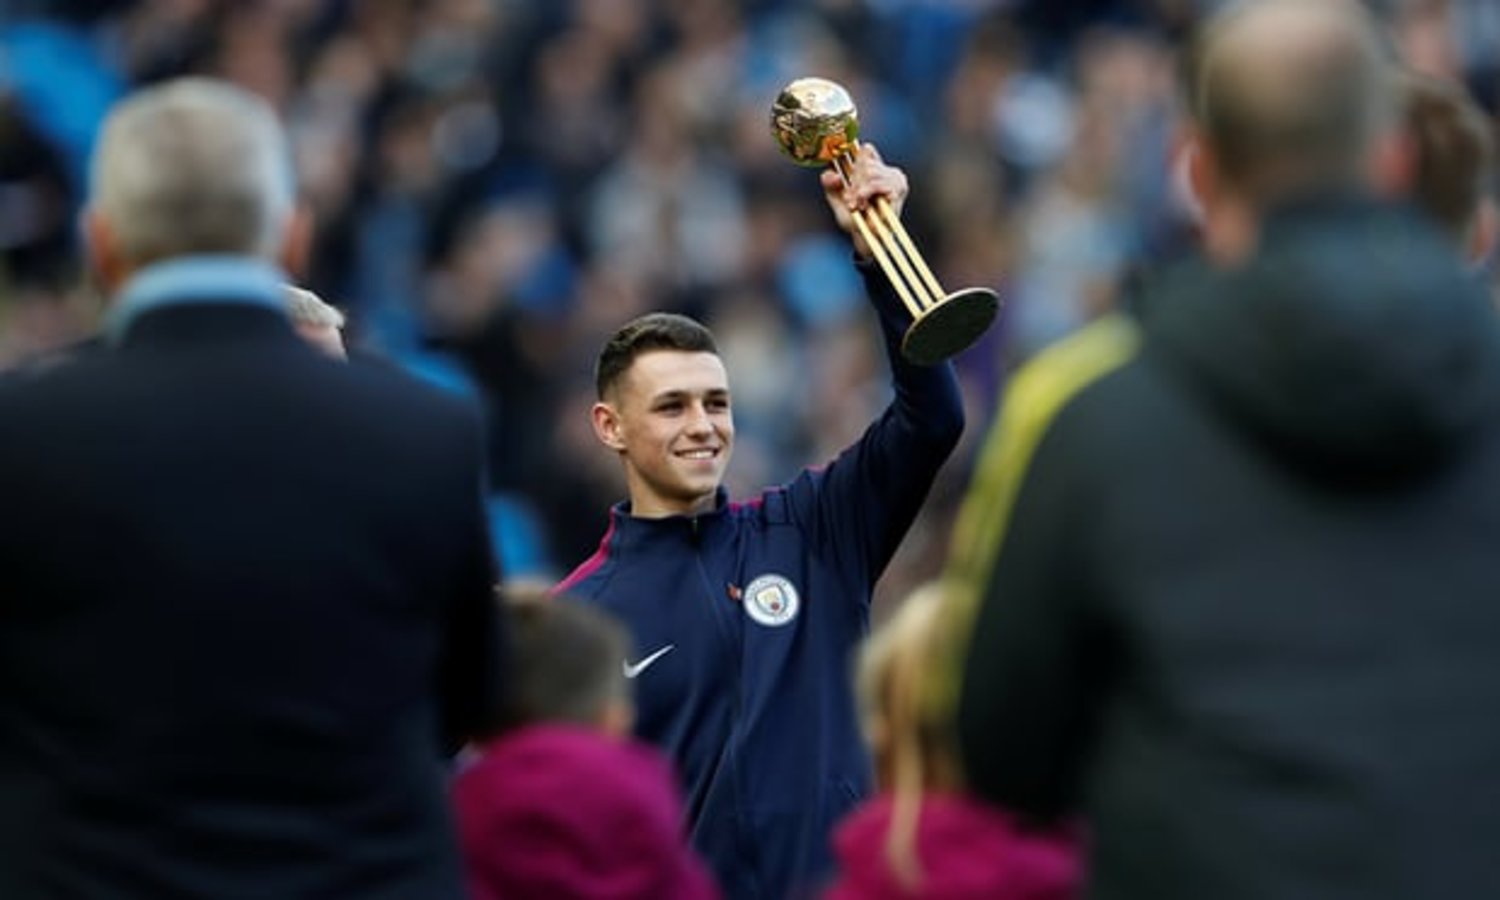  Manchester City’s Phil Foden with his Golden Ball trophy from the Under-17s World Cup before the match with Arsenal at the start of November. Photograph: Lee Smith/Reuters
 